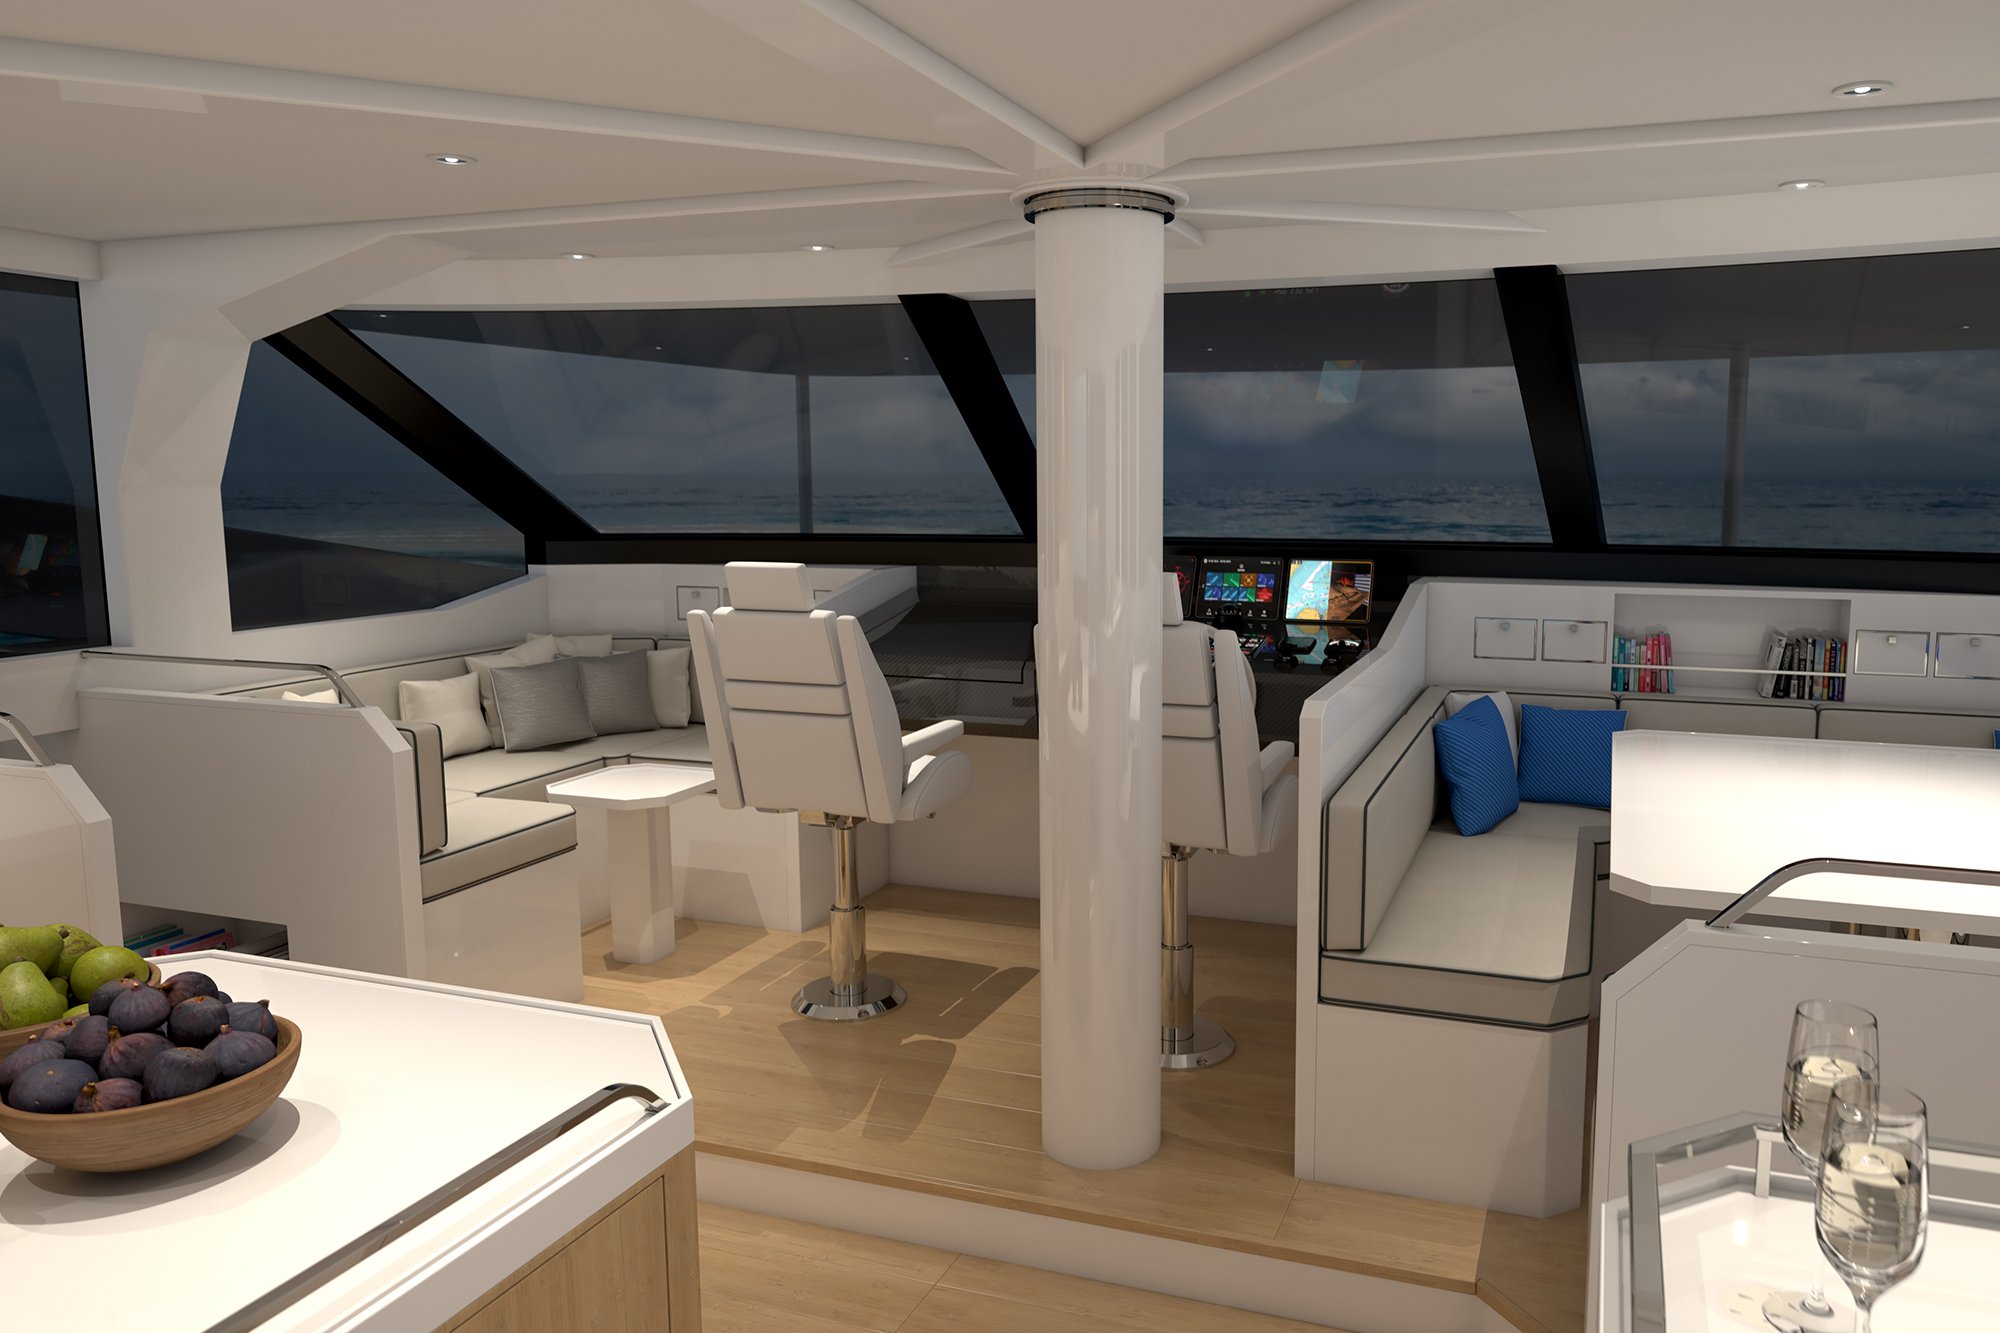 The interior design of the solar-powered ZEN50 Catamaran featuring an automated wingsail